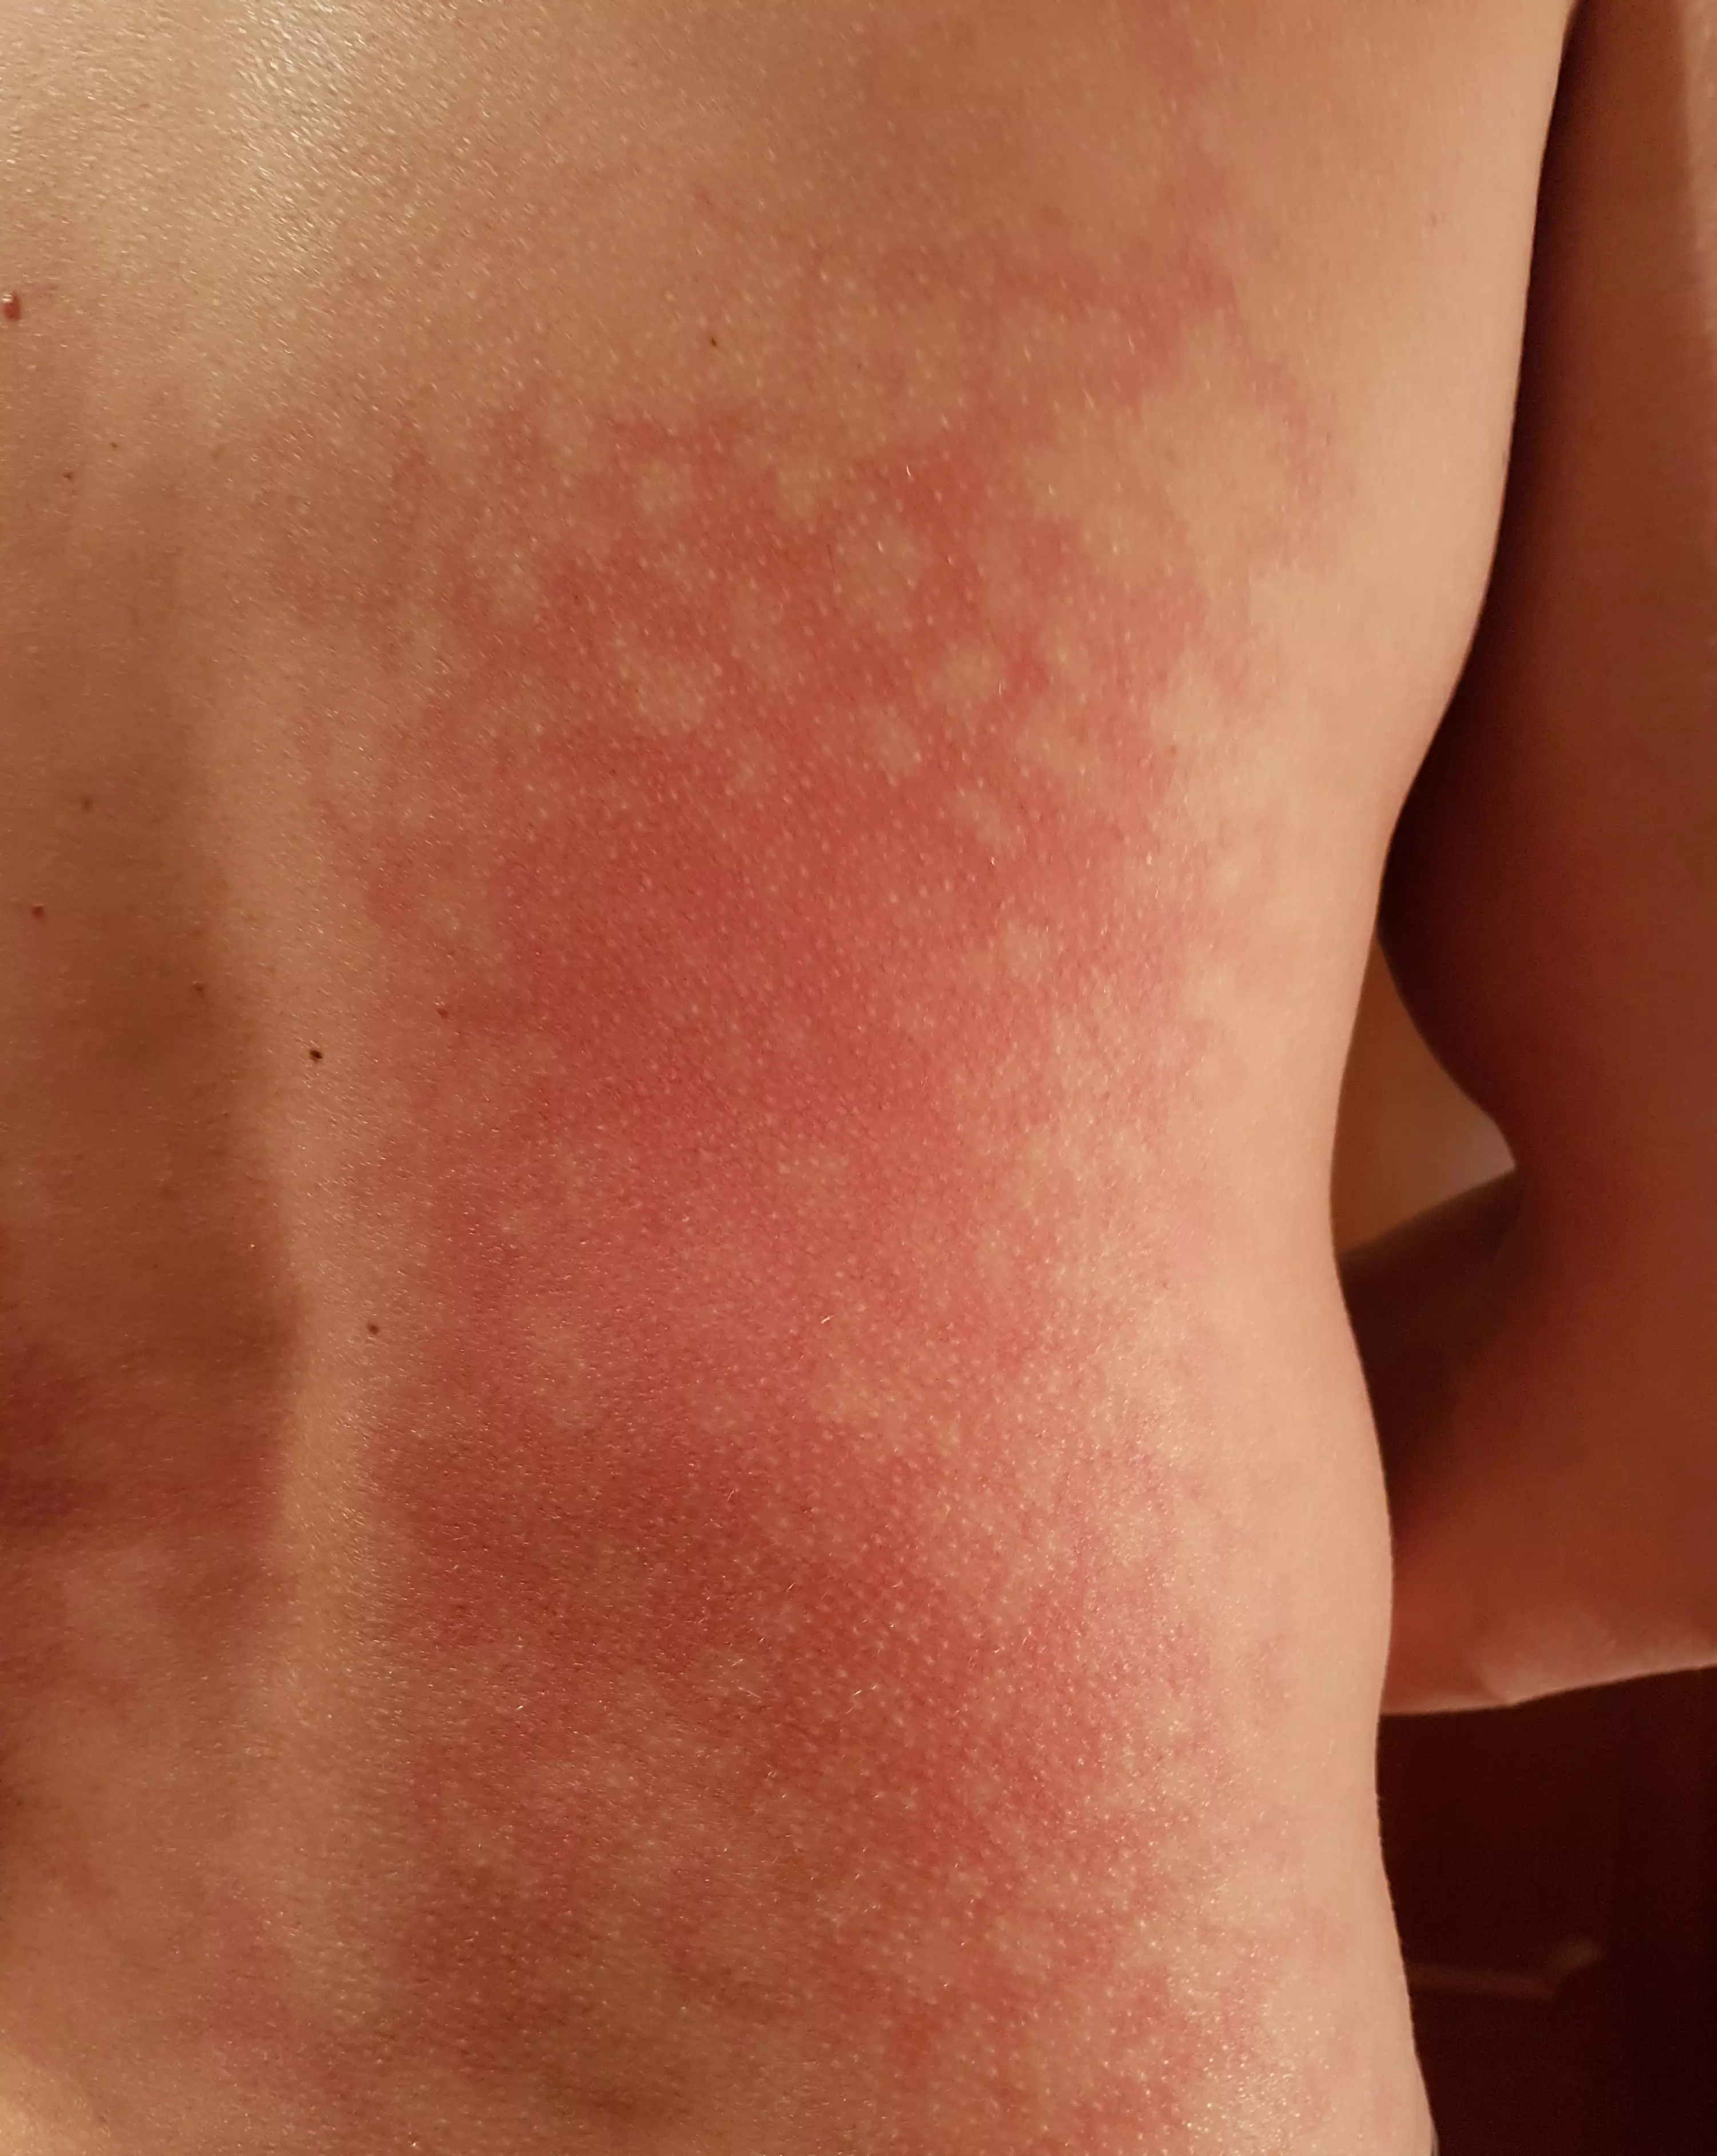 It's not a burn, but a blotchy rash caused by intense heat (